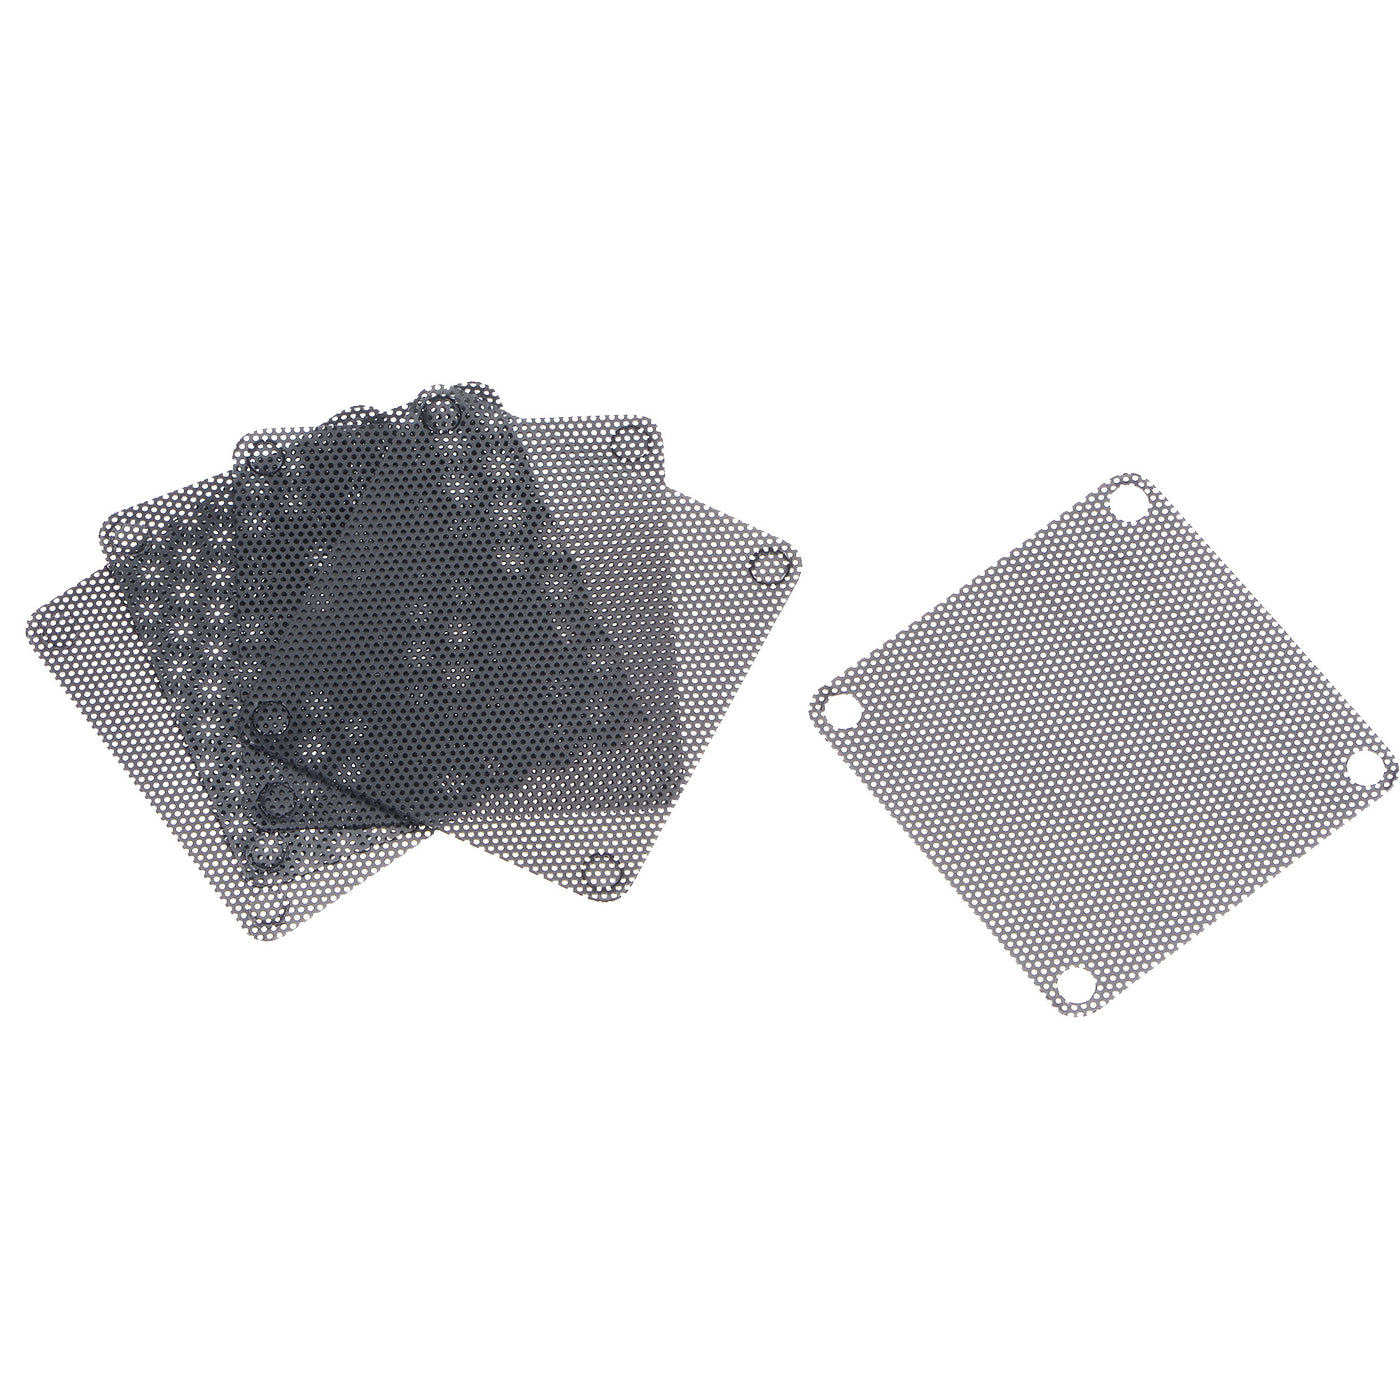 uxcell Uxcell PC Dust Fan Screen with Screws for Cooling Dustproof Case Cover PVC 60mm 5pcs